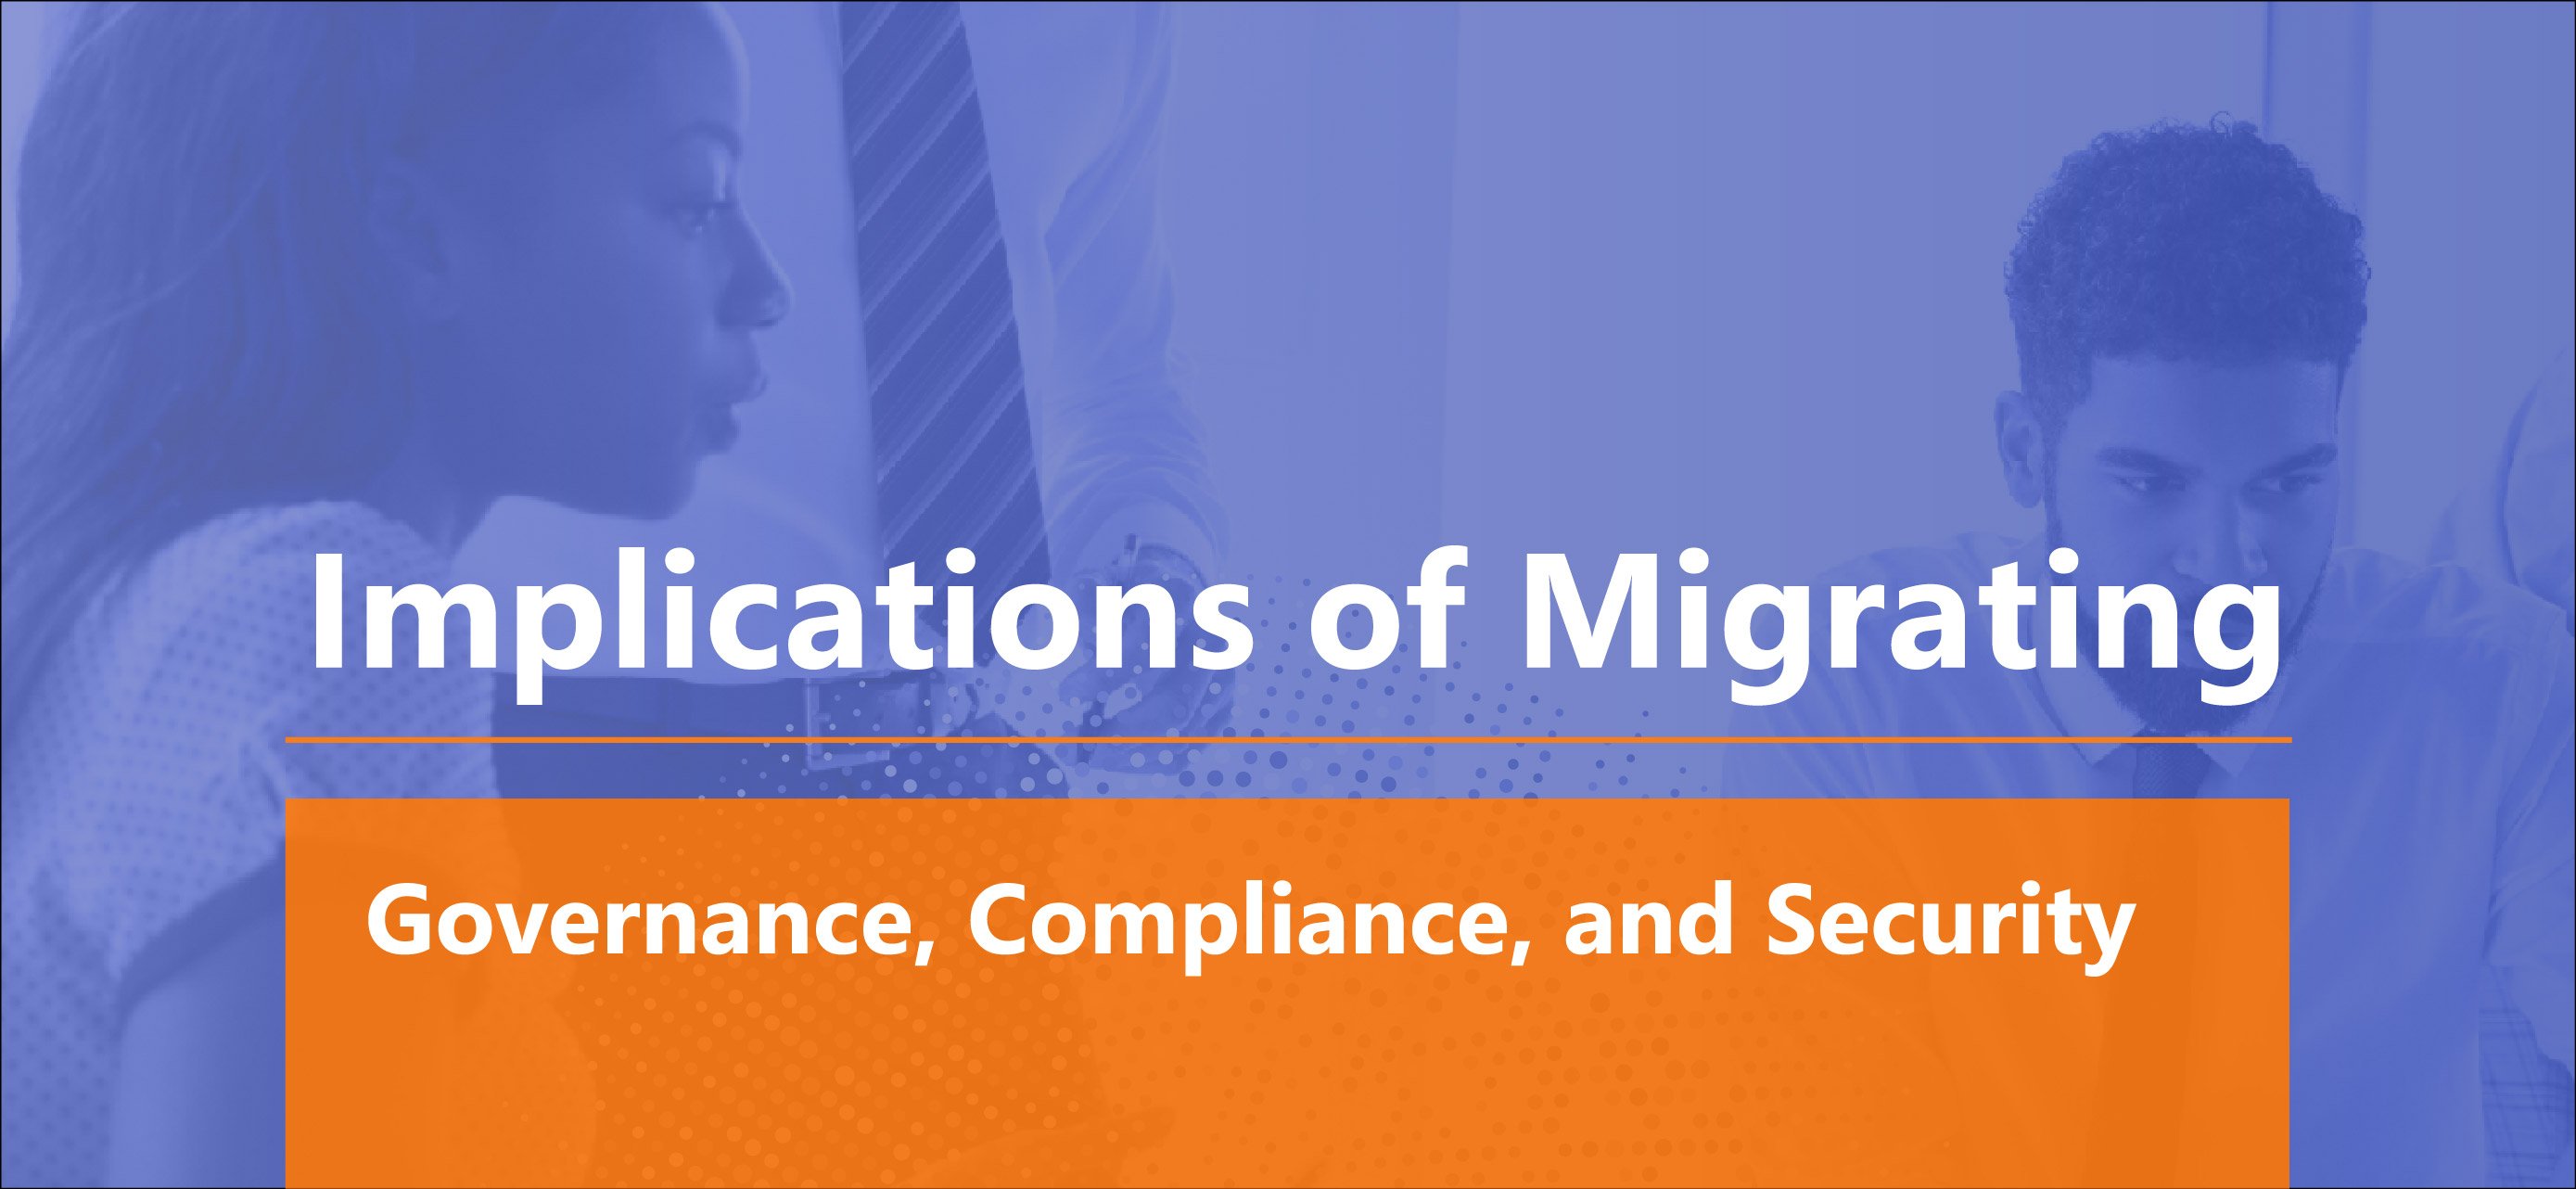 Implications of Migrating